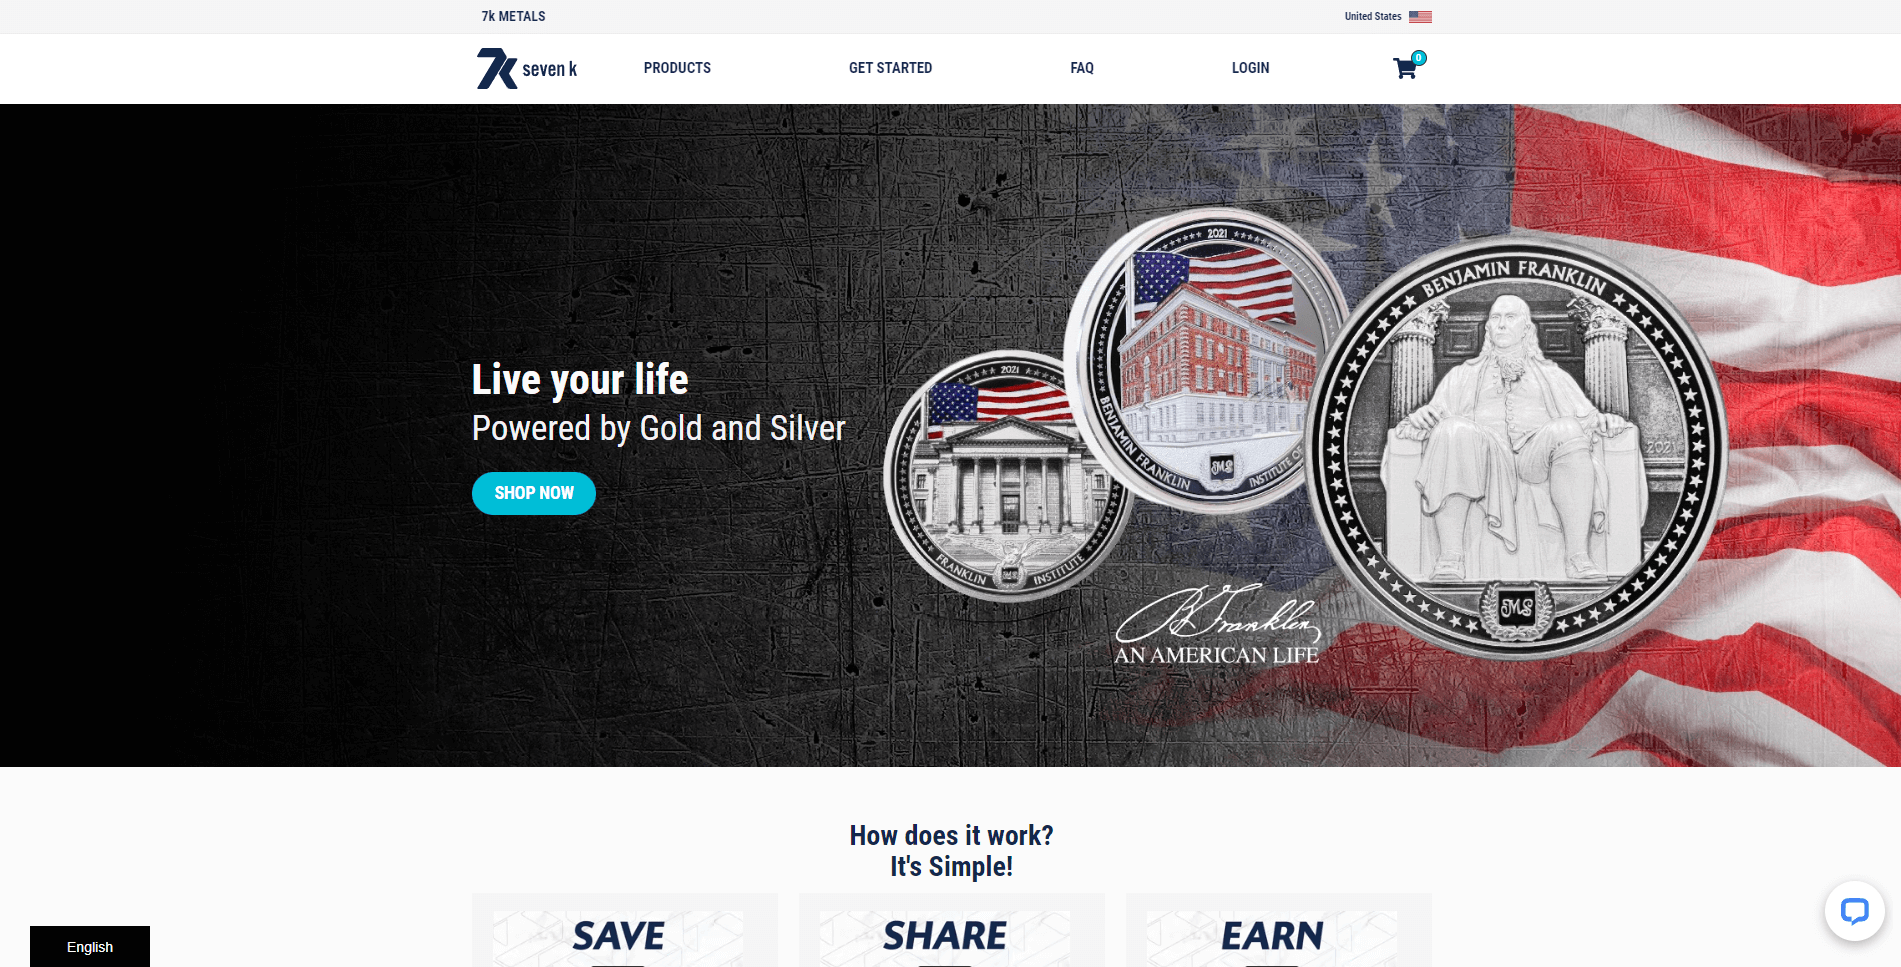 7k metals gold ira review homepage